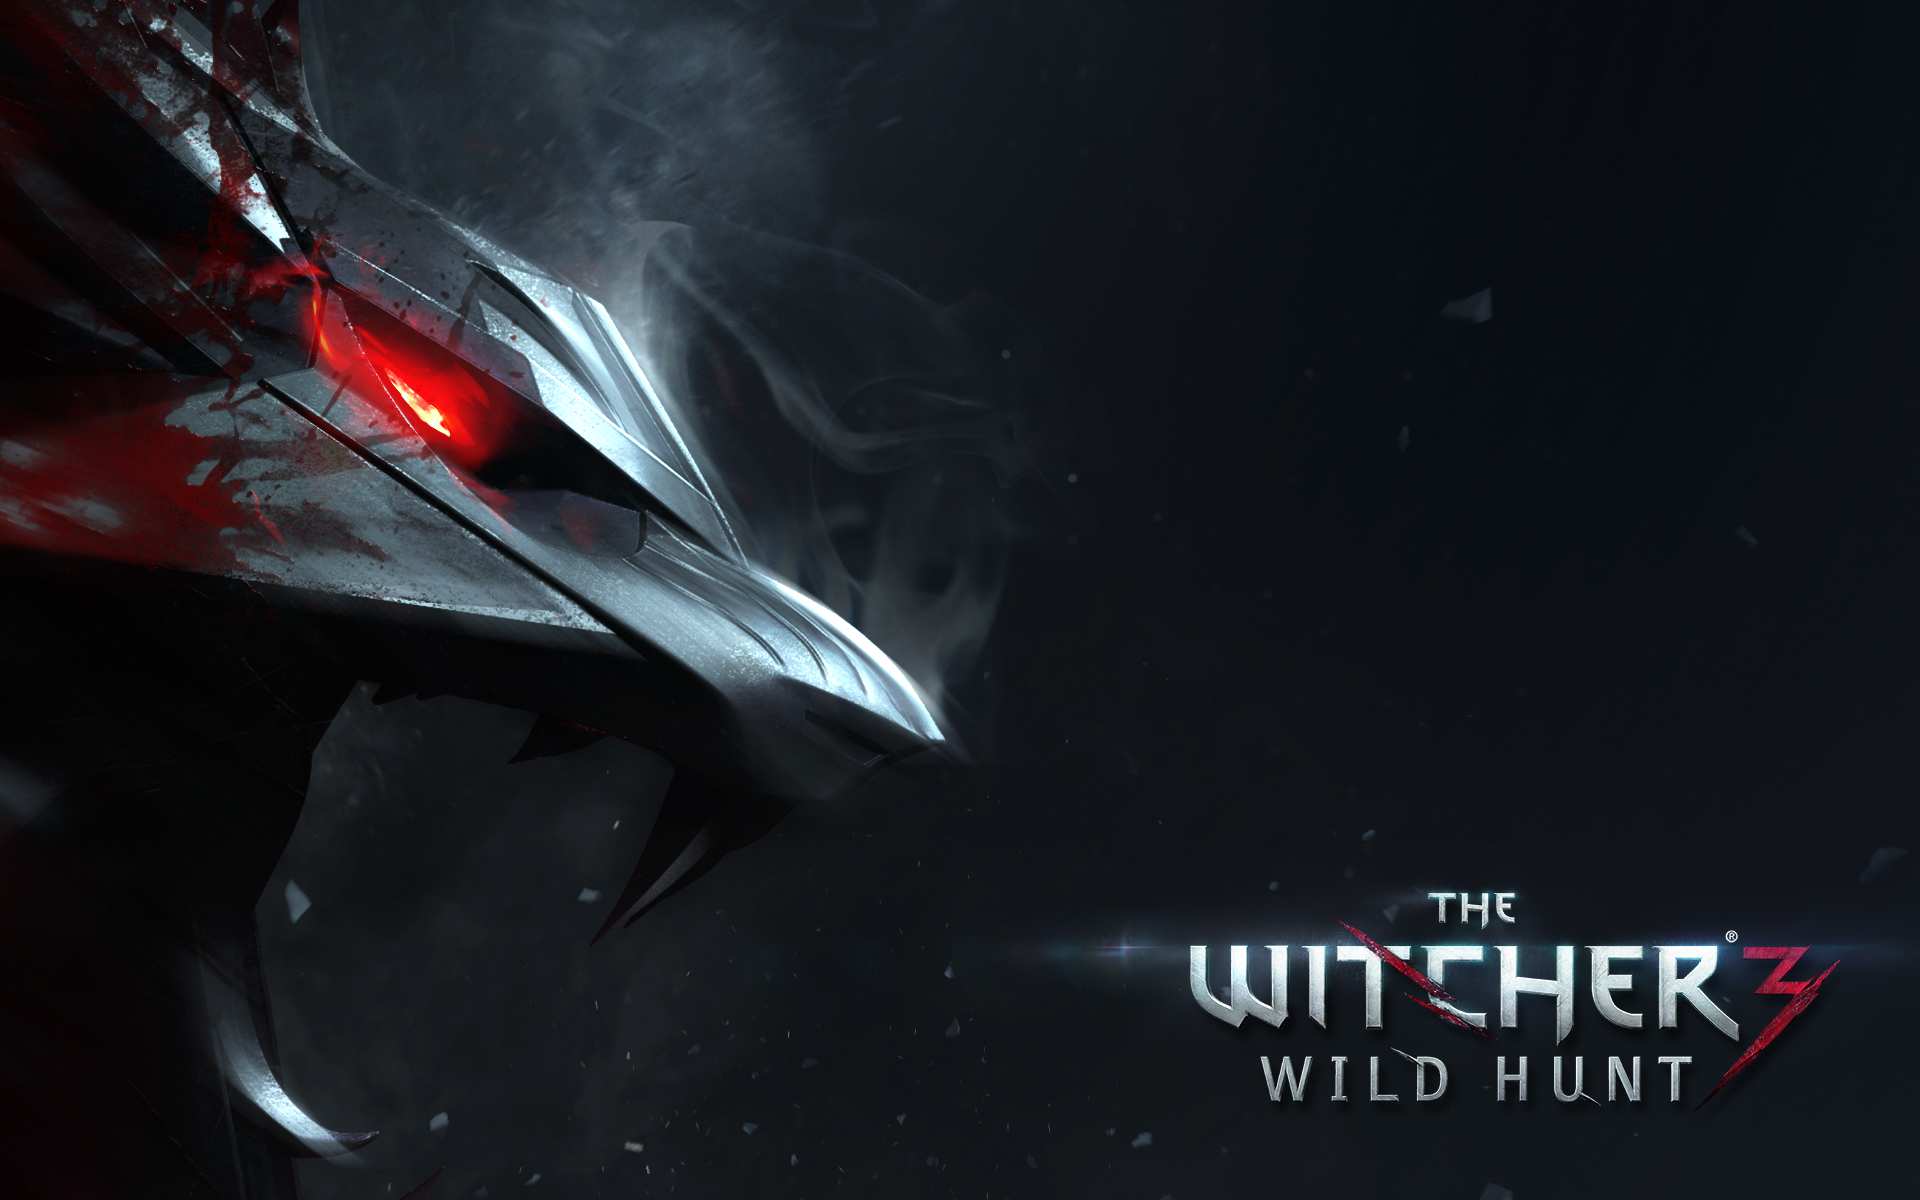 the witcher 3: wild hunt, the witcher, video game